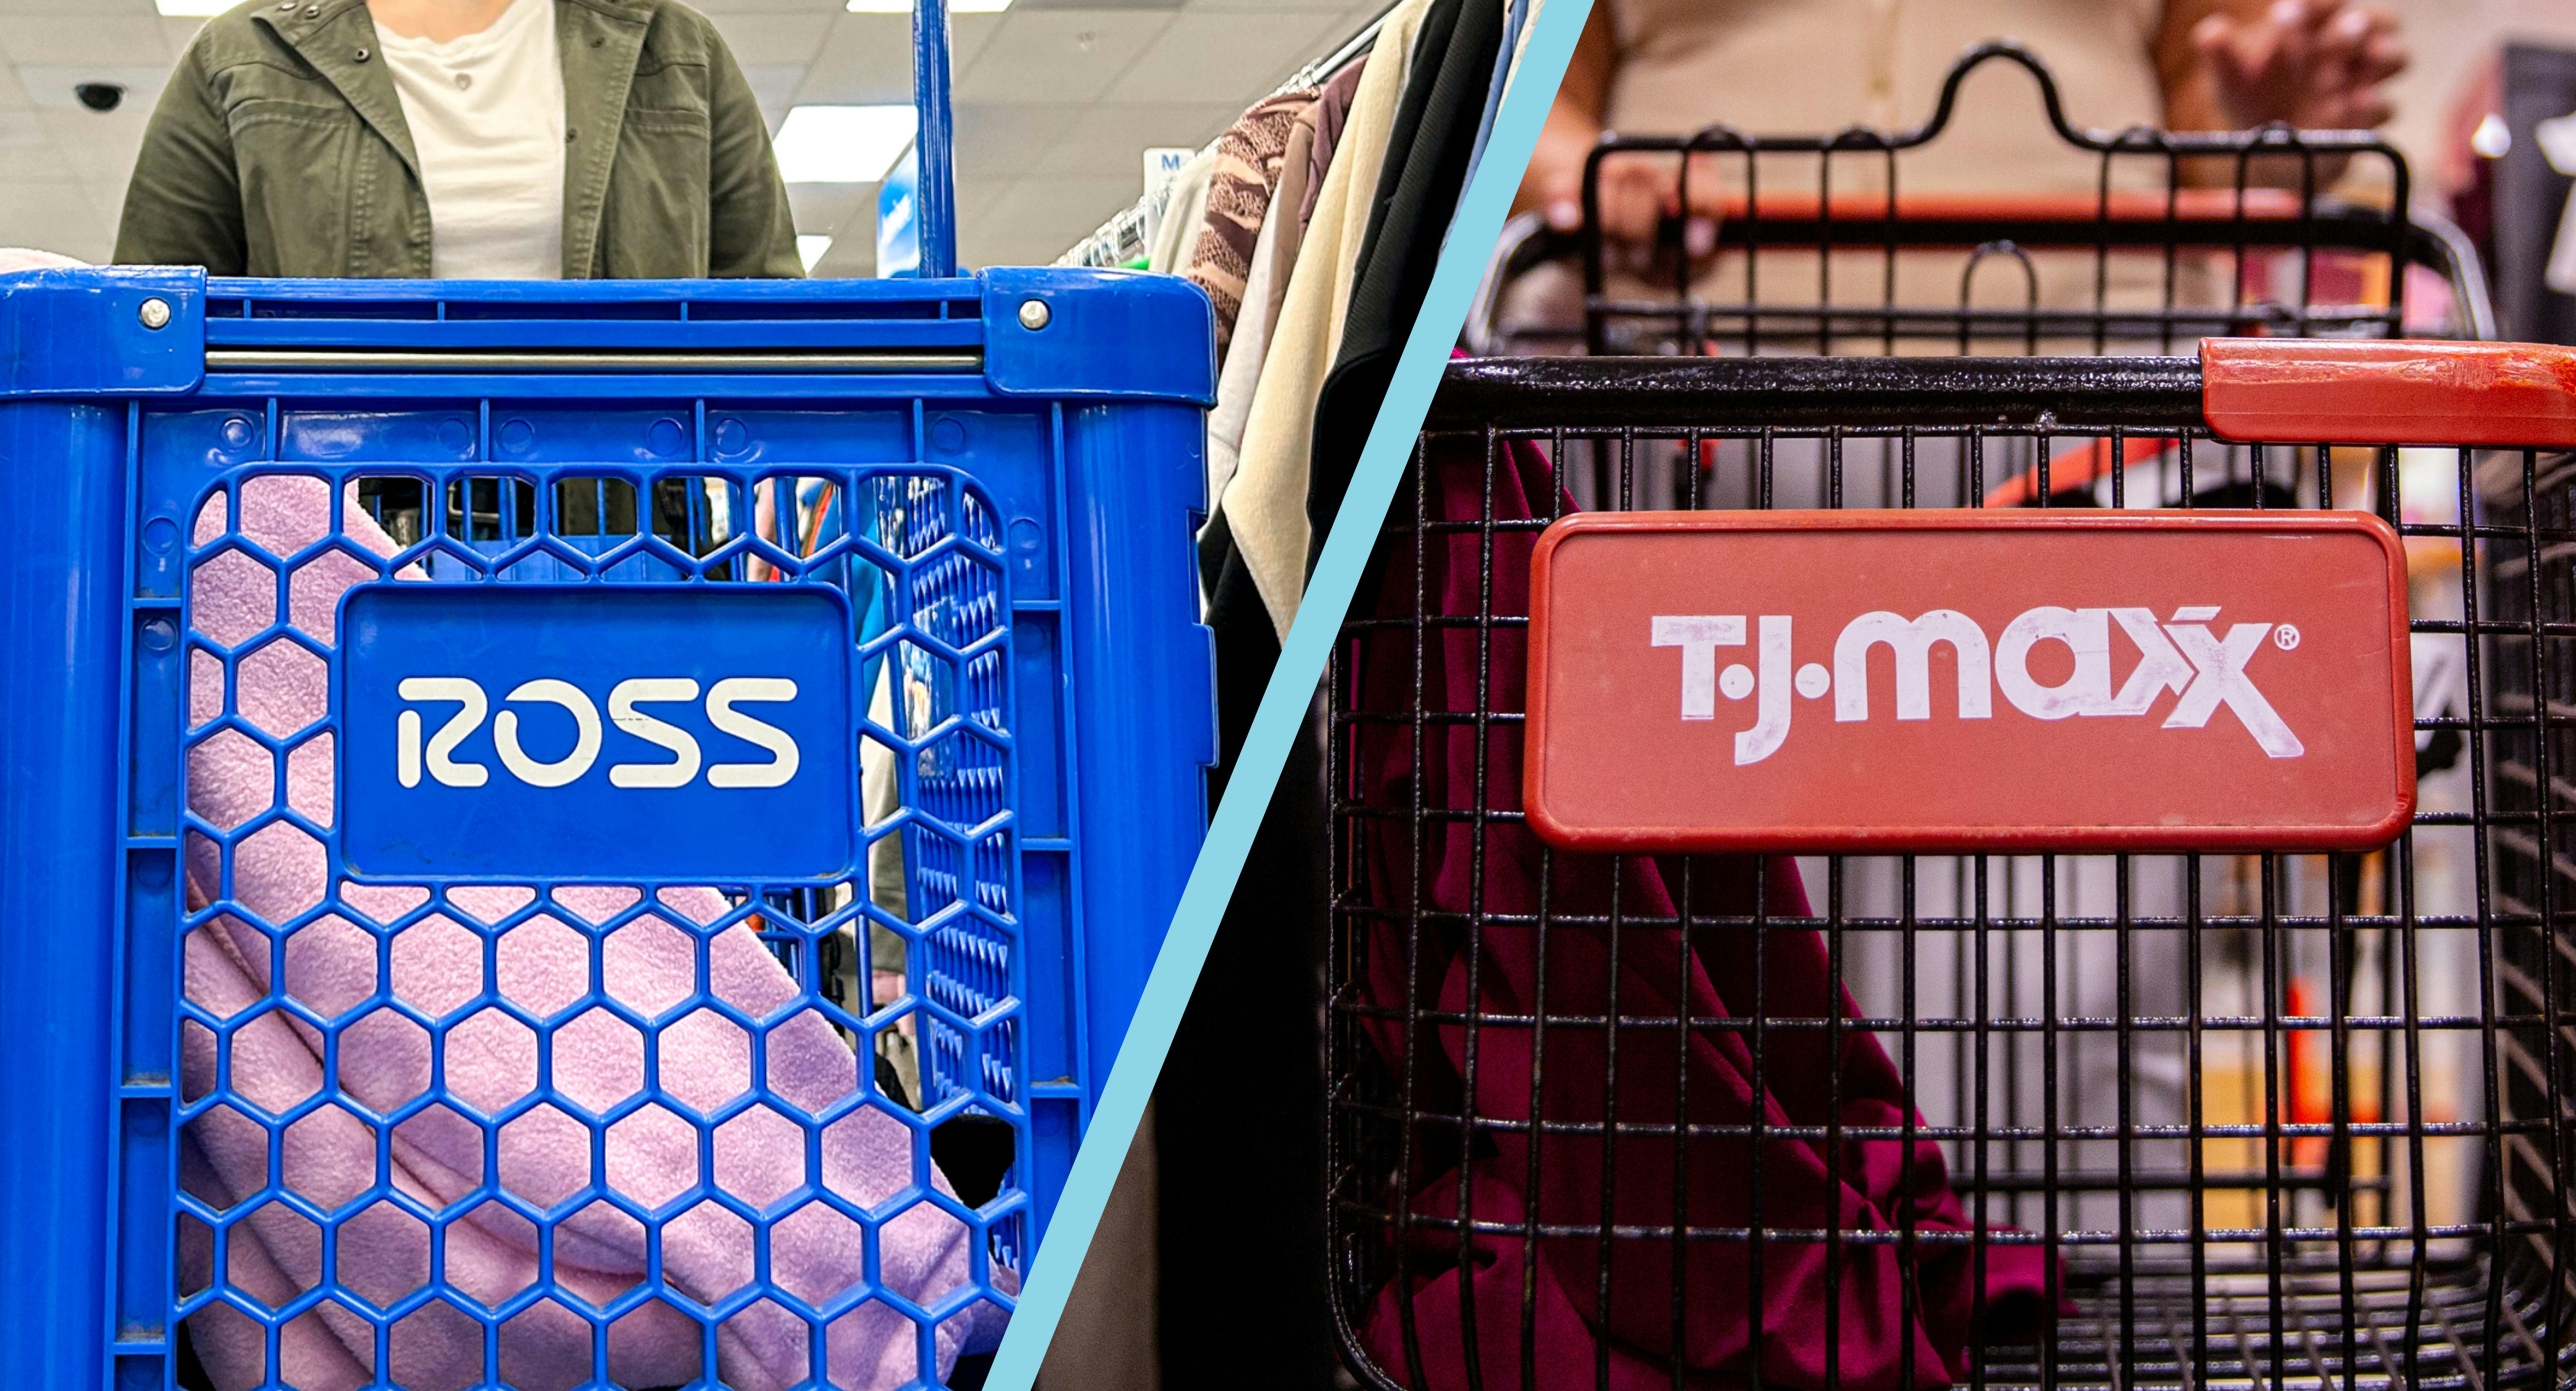 How do discount stores like Ross, Marshalls, TJ Maxx, DSW get